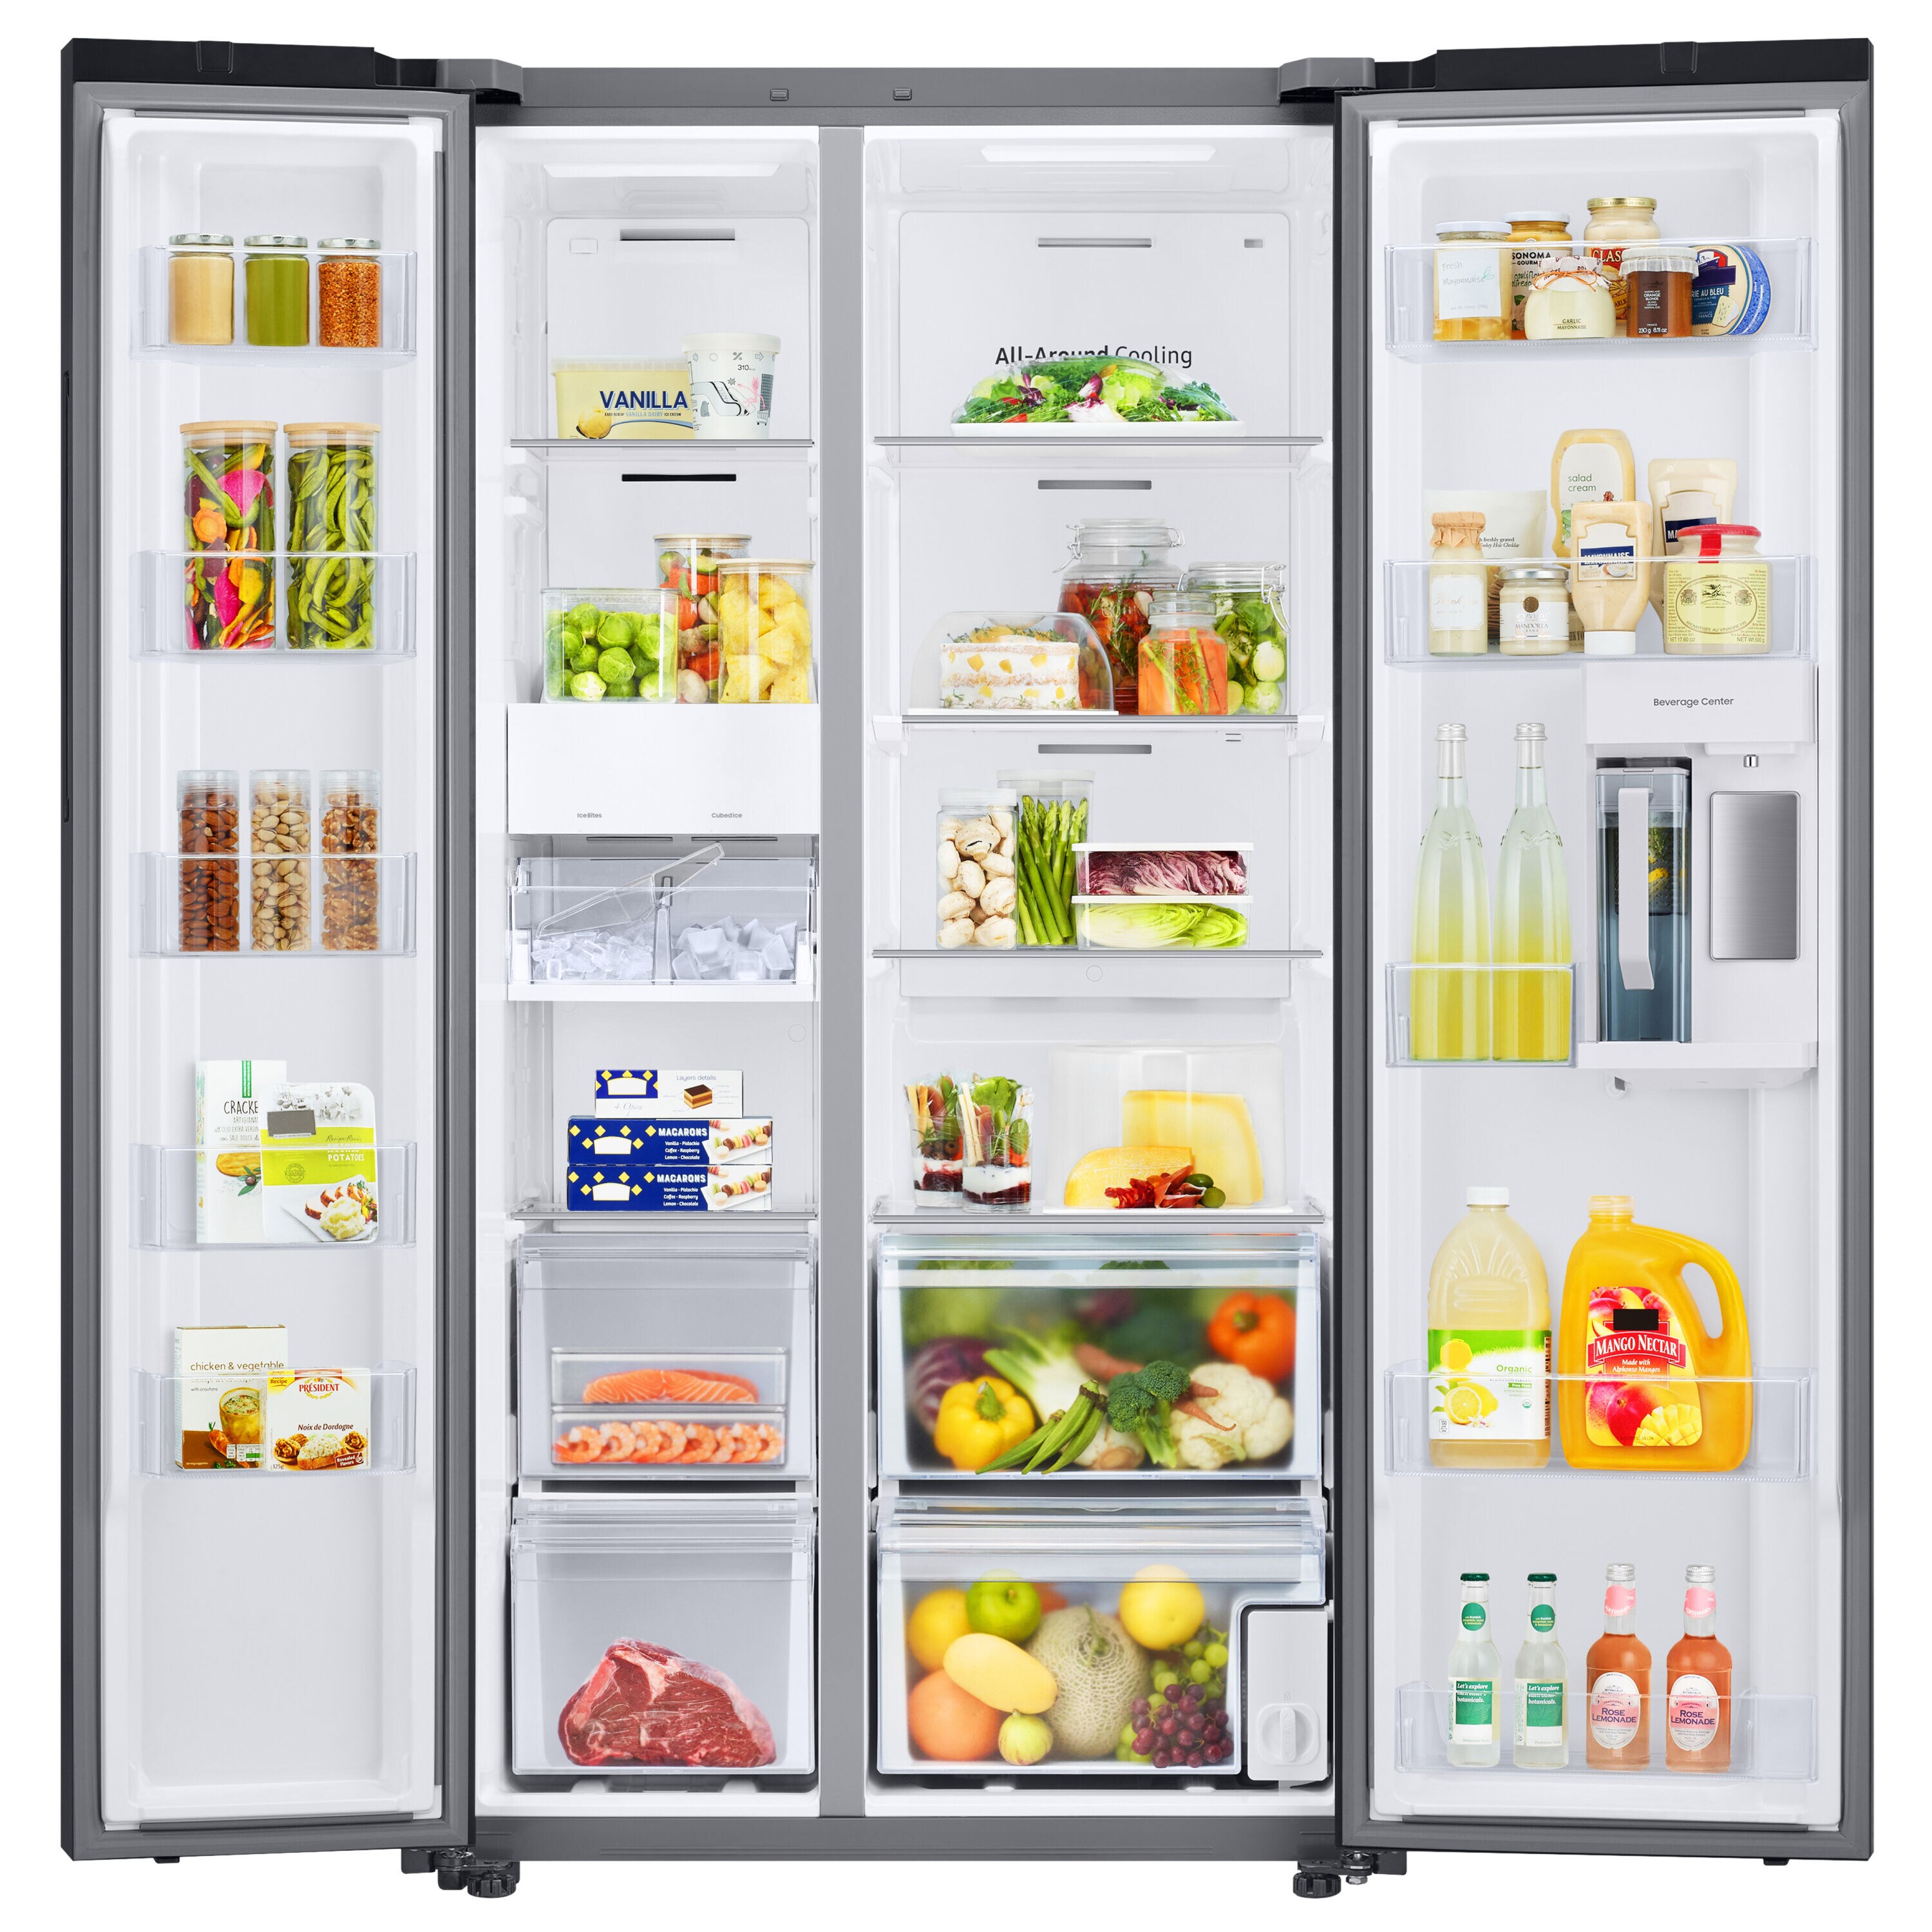 U-Line UCLRCO2175B40 24 Inch Combo Clear Ice Maker/Refrigerator with 2.5  cu. ft. Refrigerator Capacity, 40 lbs. Daily Ice Production, 15 lbs. Ice  Storage and Drain Required: Black with Pump